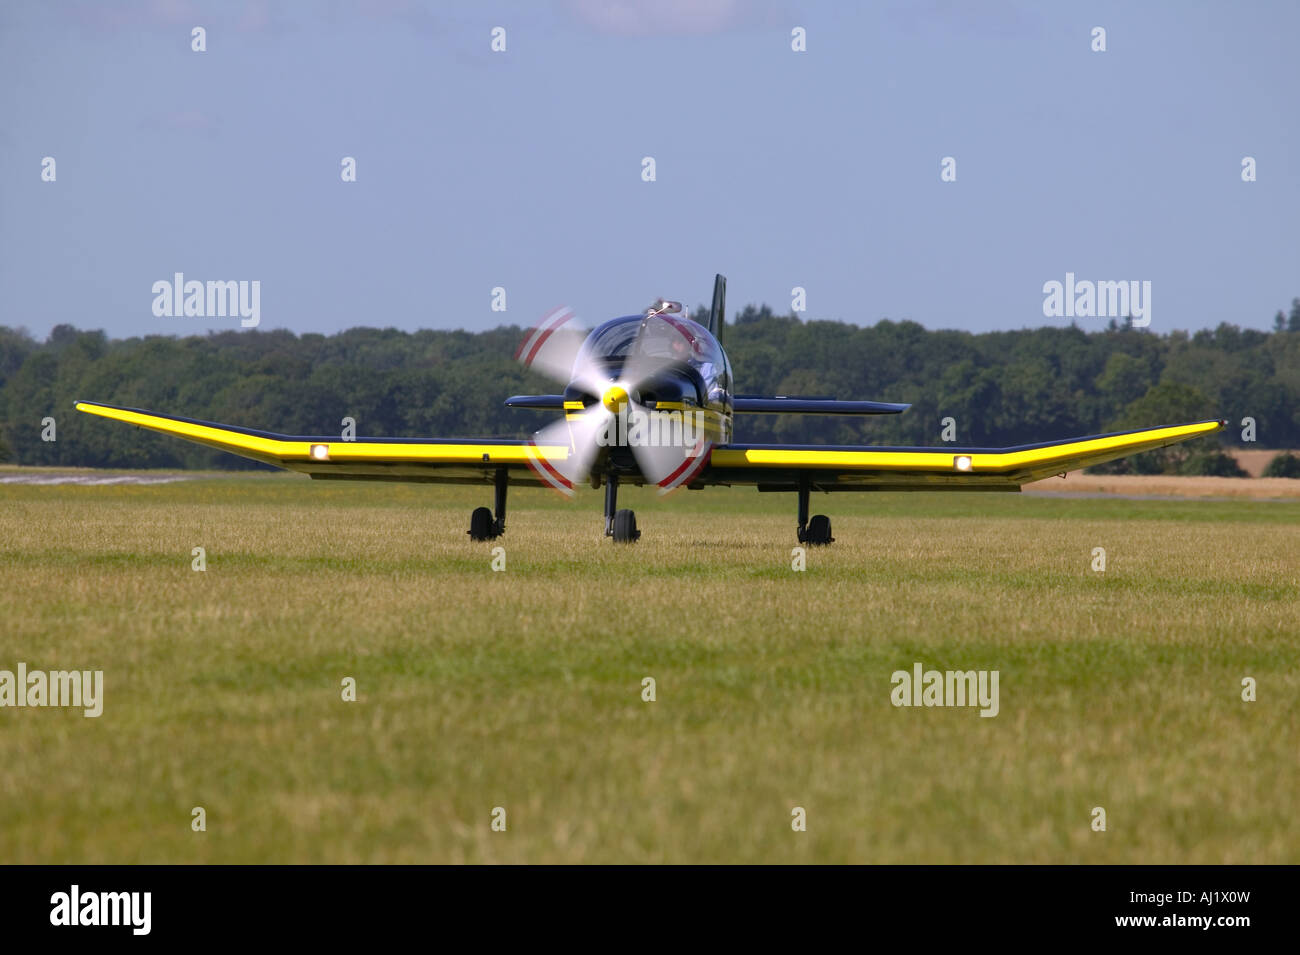 Light aircraft taking off on grass motion blur on the propeller Stock Photo